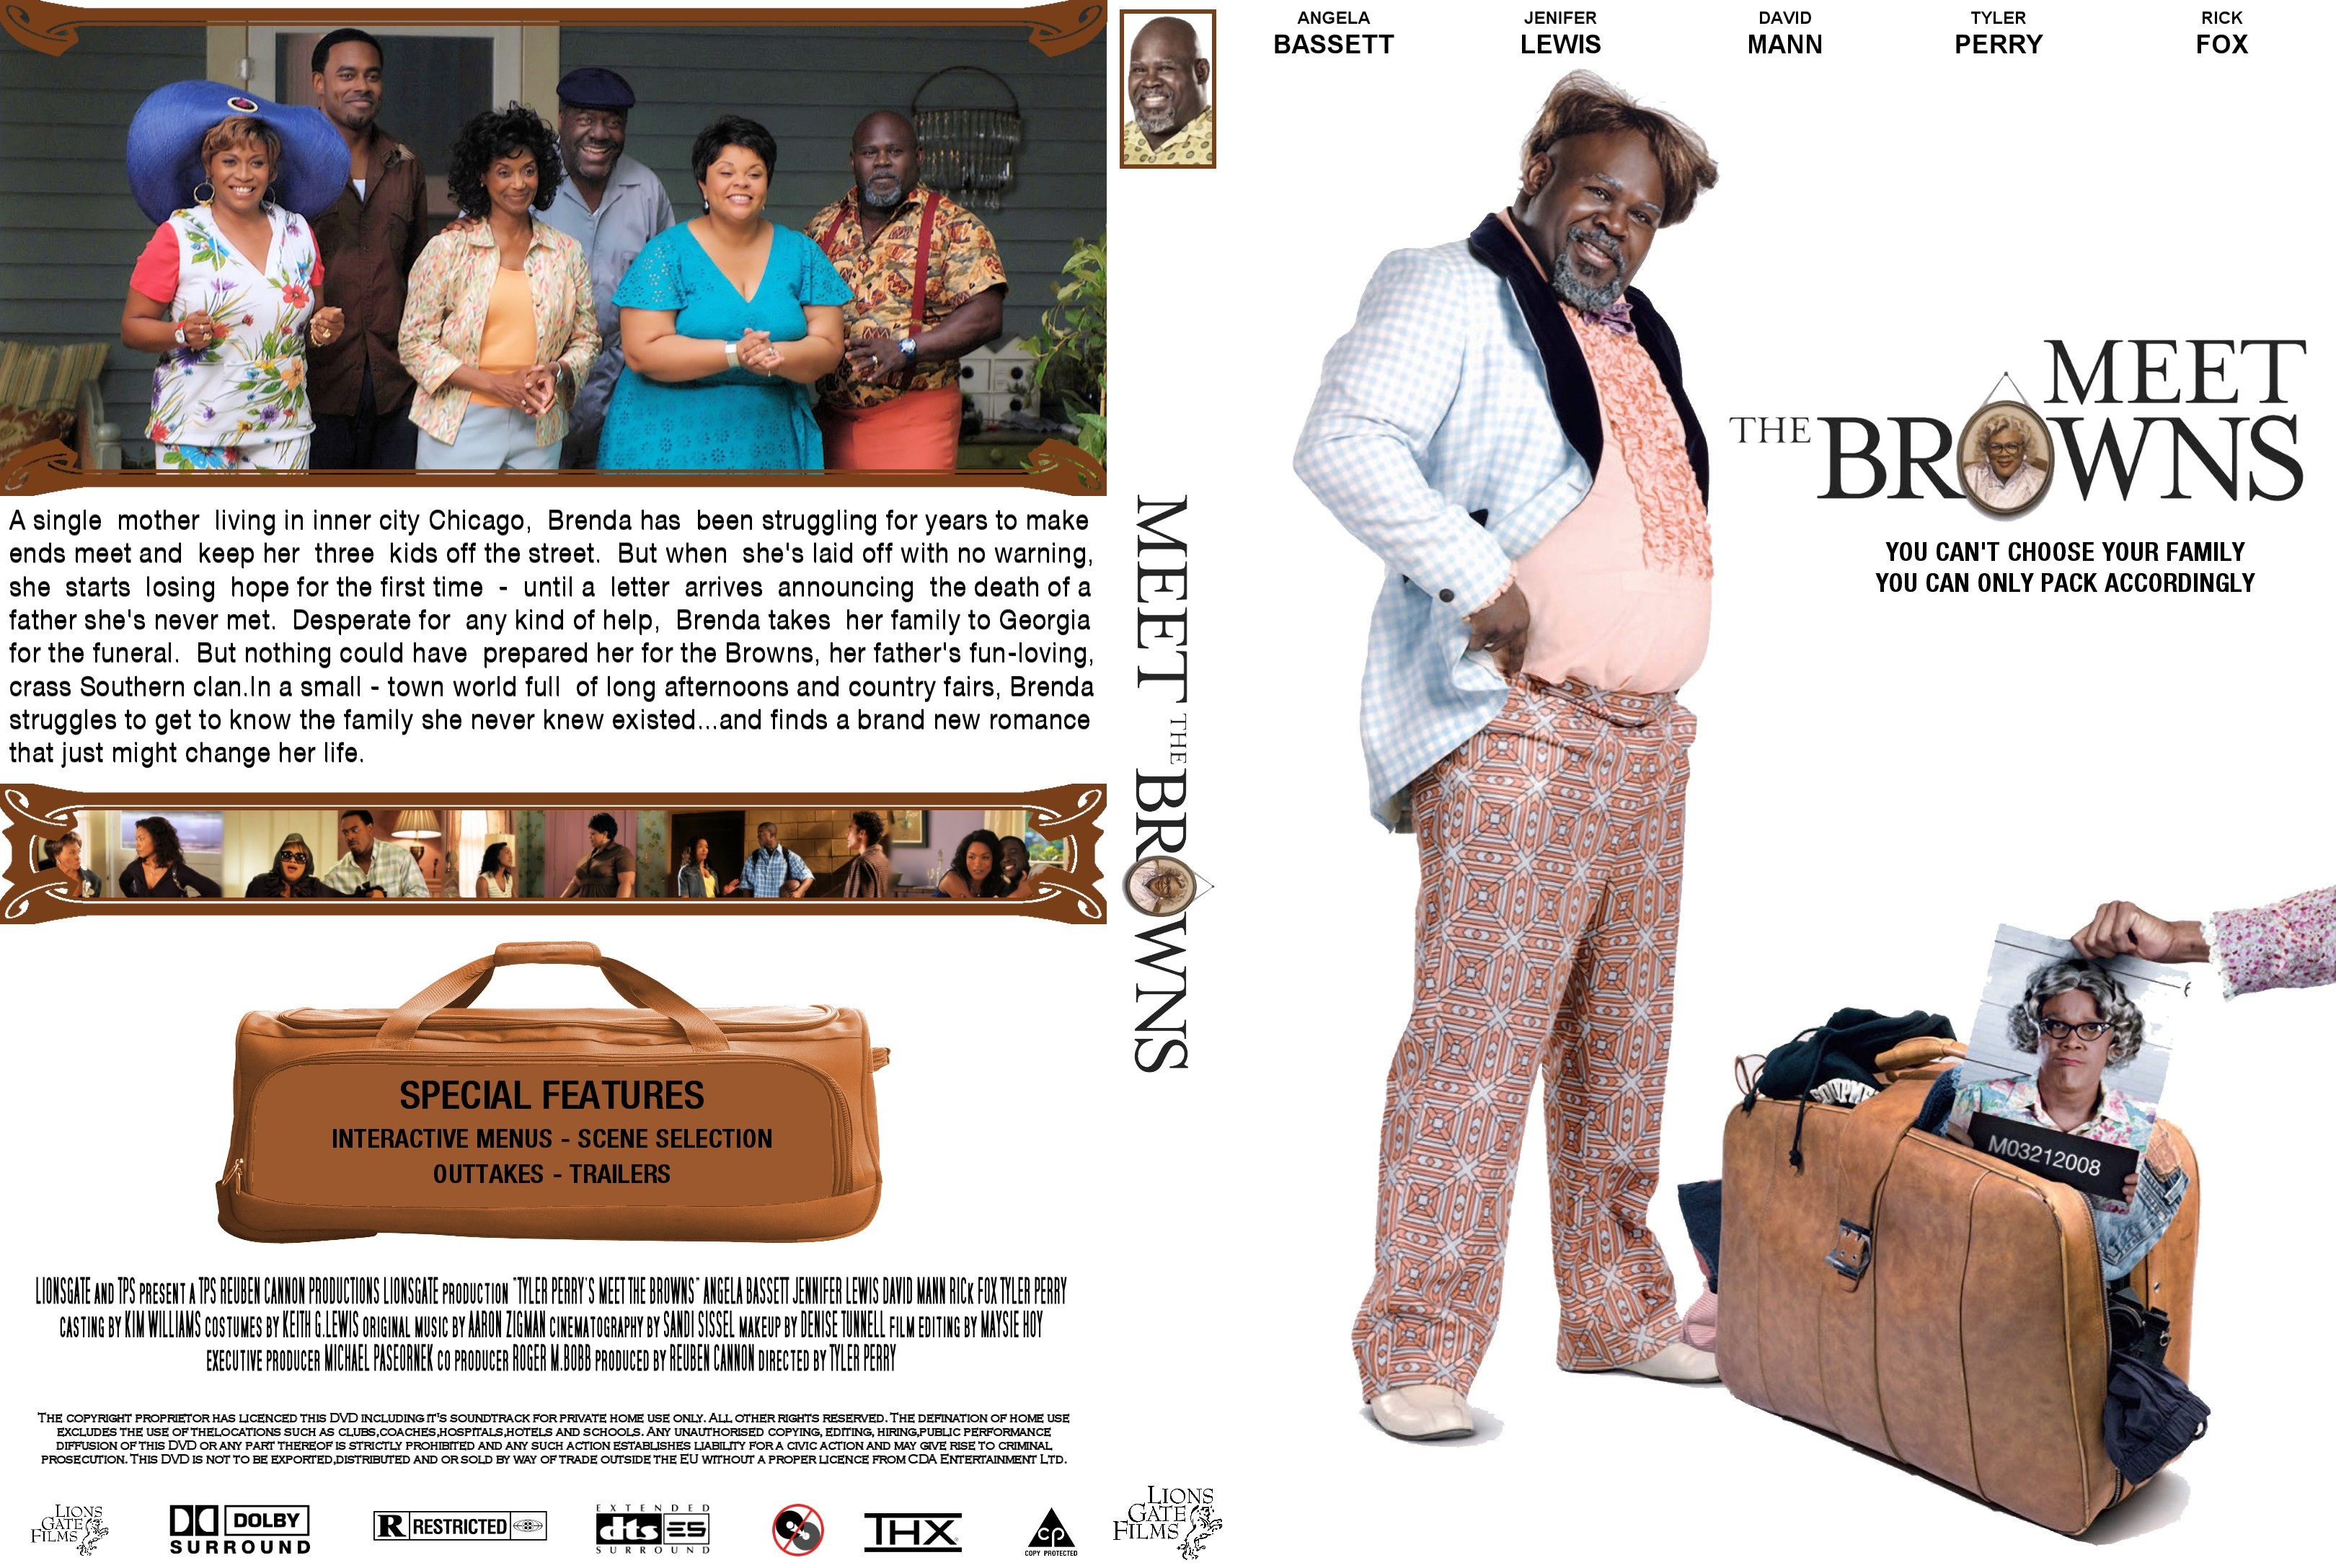 List of Meet the Browns episodes